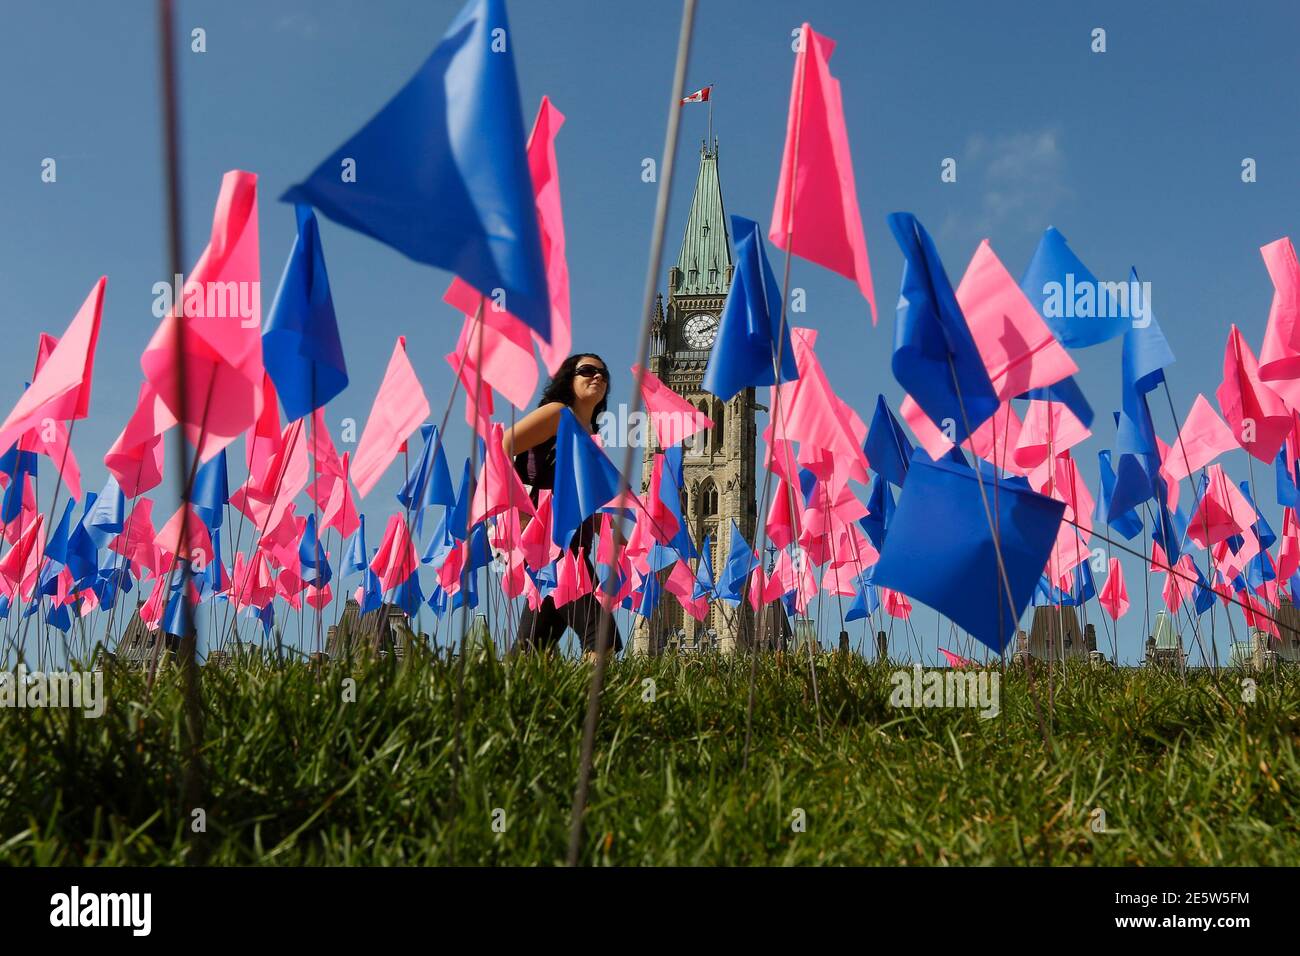 A woman walks past thousands of pink and blue flags an anti-abortion group placed on the front lawn of Parliament Hill as part of a campaign in Ottawa October 2, 2014. REUTERS/Chris Wattie (CANADA - Tags: POLITICS ENVIRONMENT SOCIETY) Stock Photo